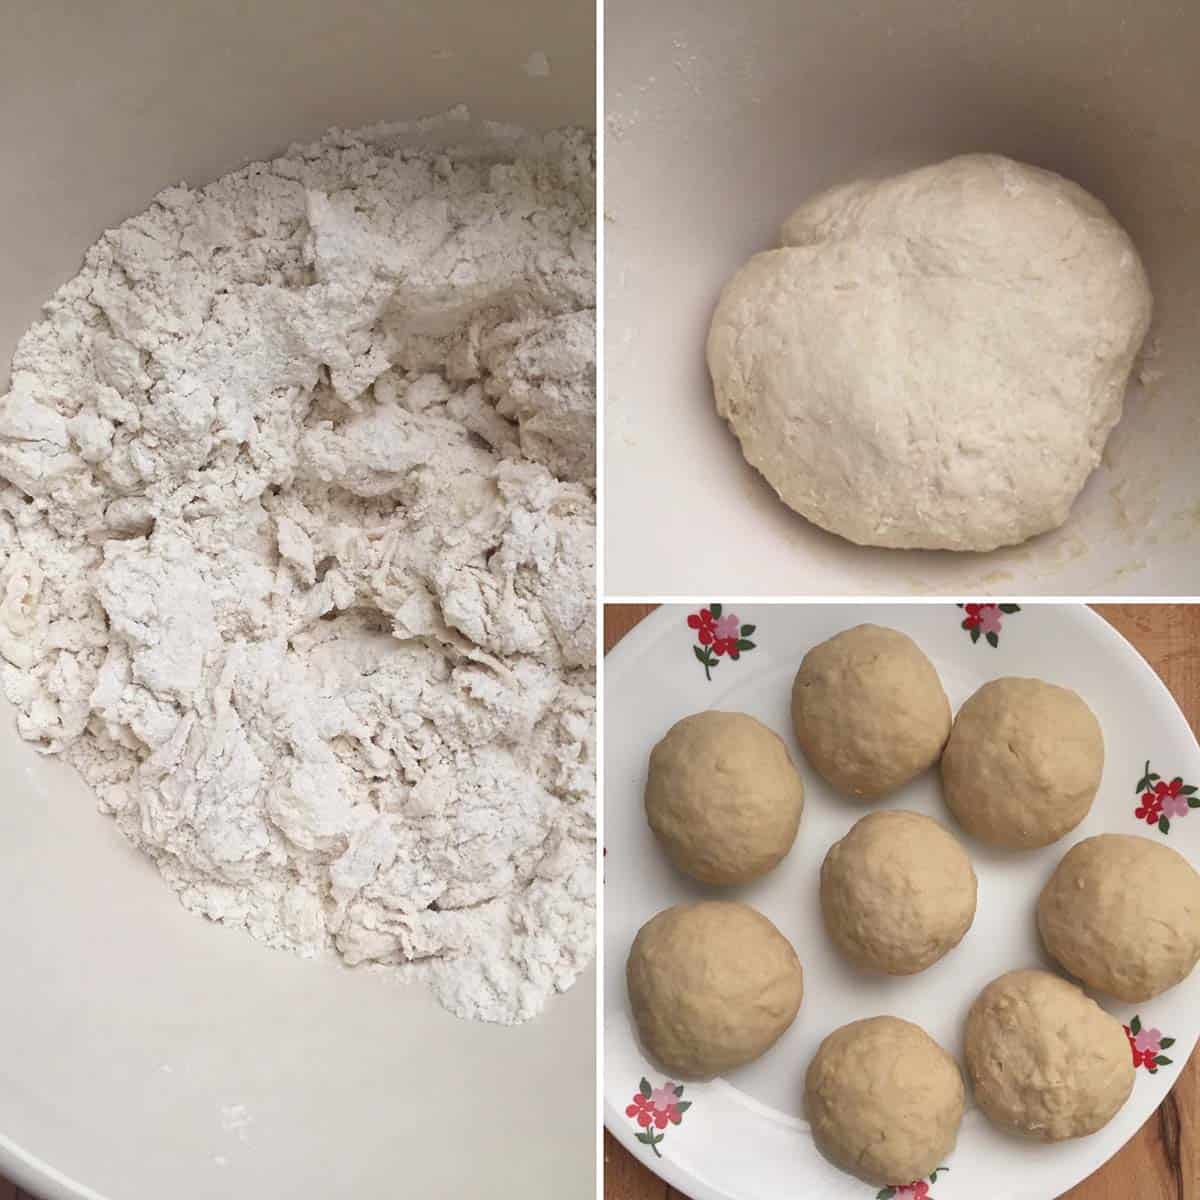 Mixing dough ingredients in a mixing bowl